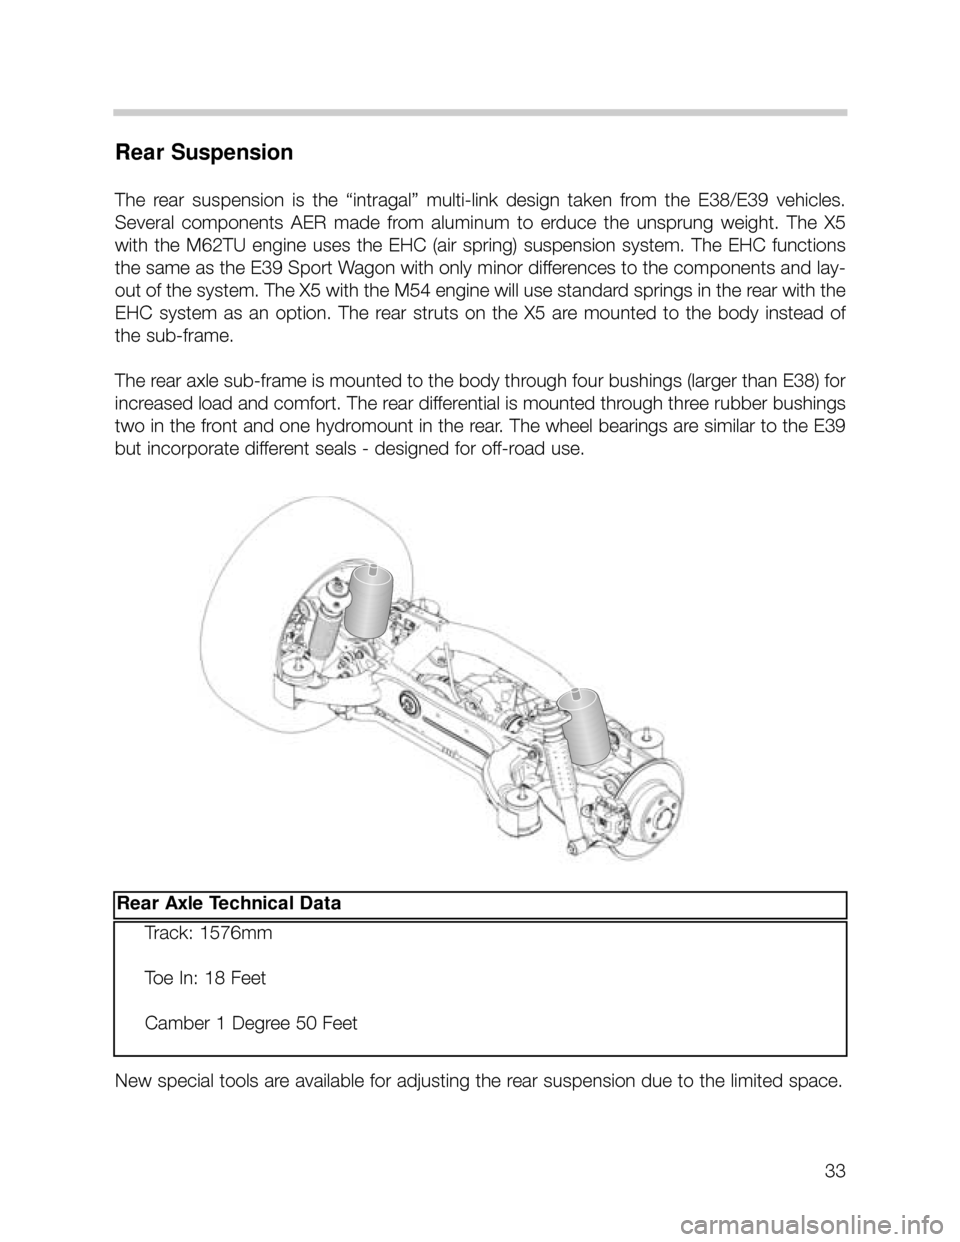 BMW X5 2000 E53 Owners Guide 33
Rear Suspension
The  rear  suspension  is  the  “intragal”  multi-link  design  taken  from  the  E38/E39  vehicles.
Several  components  AER  made  from  aluminum  to  erduce  the  unsprung  w